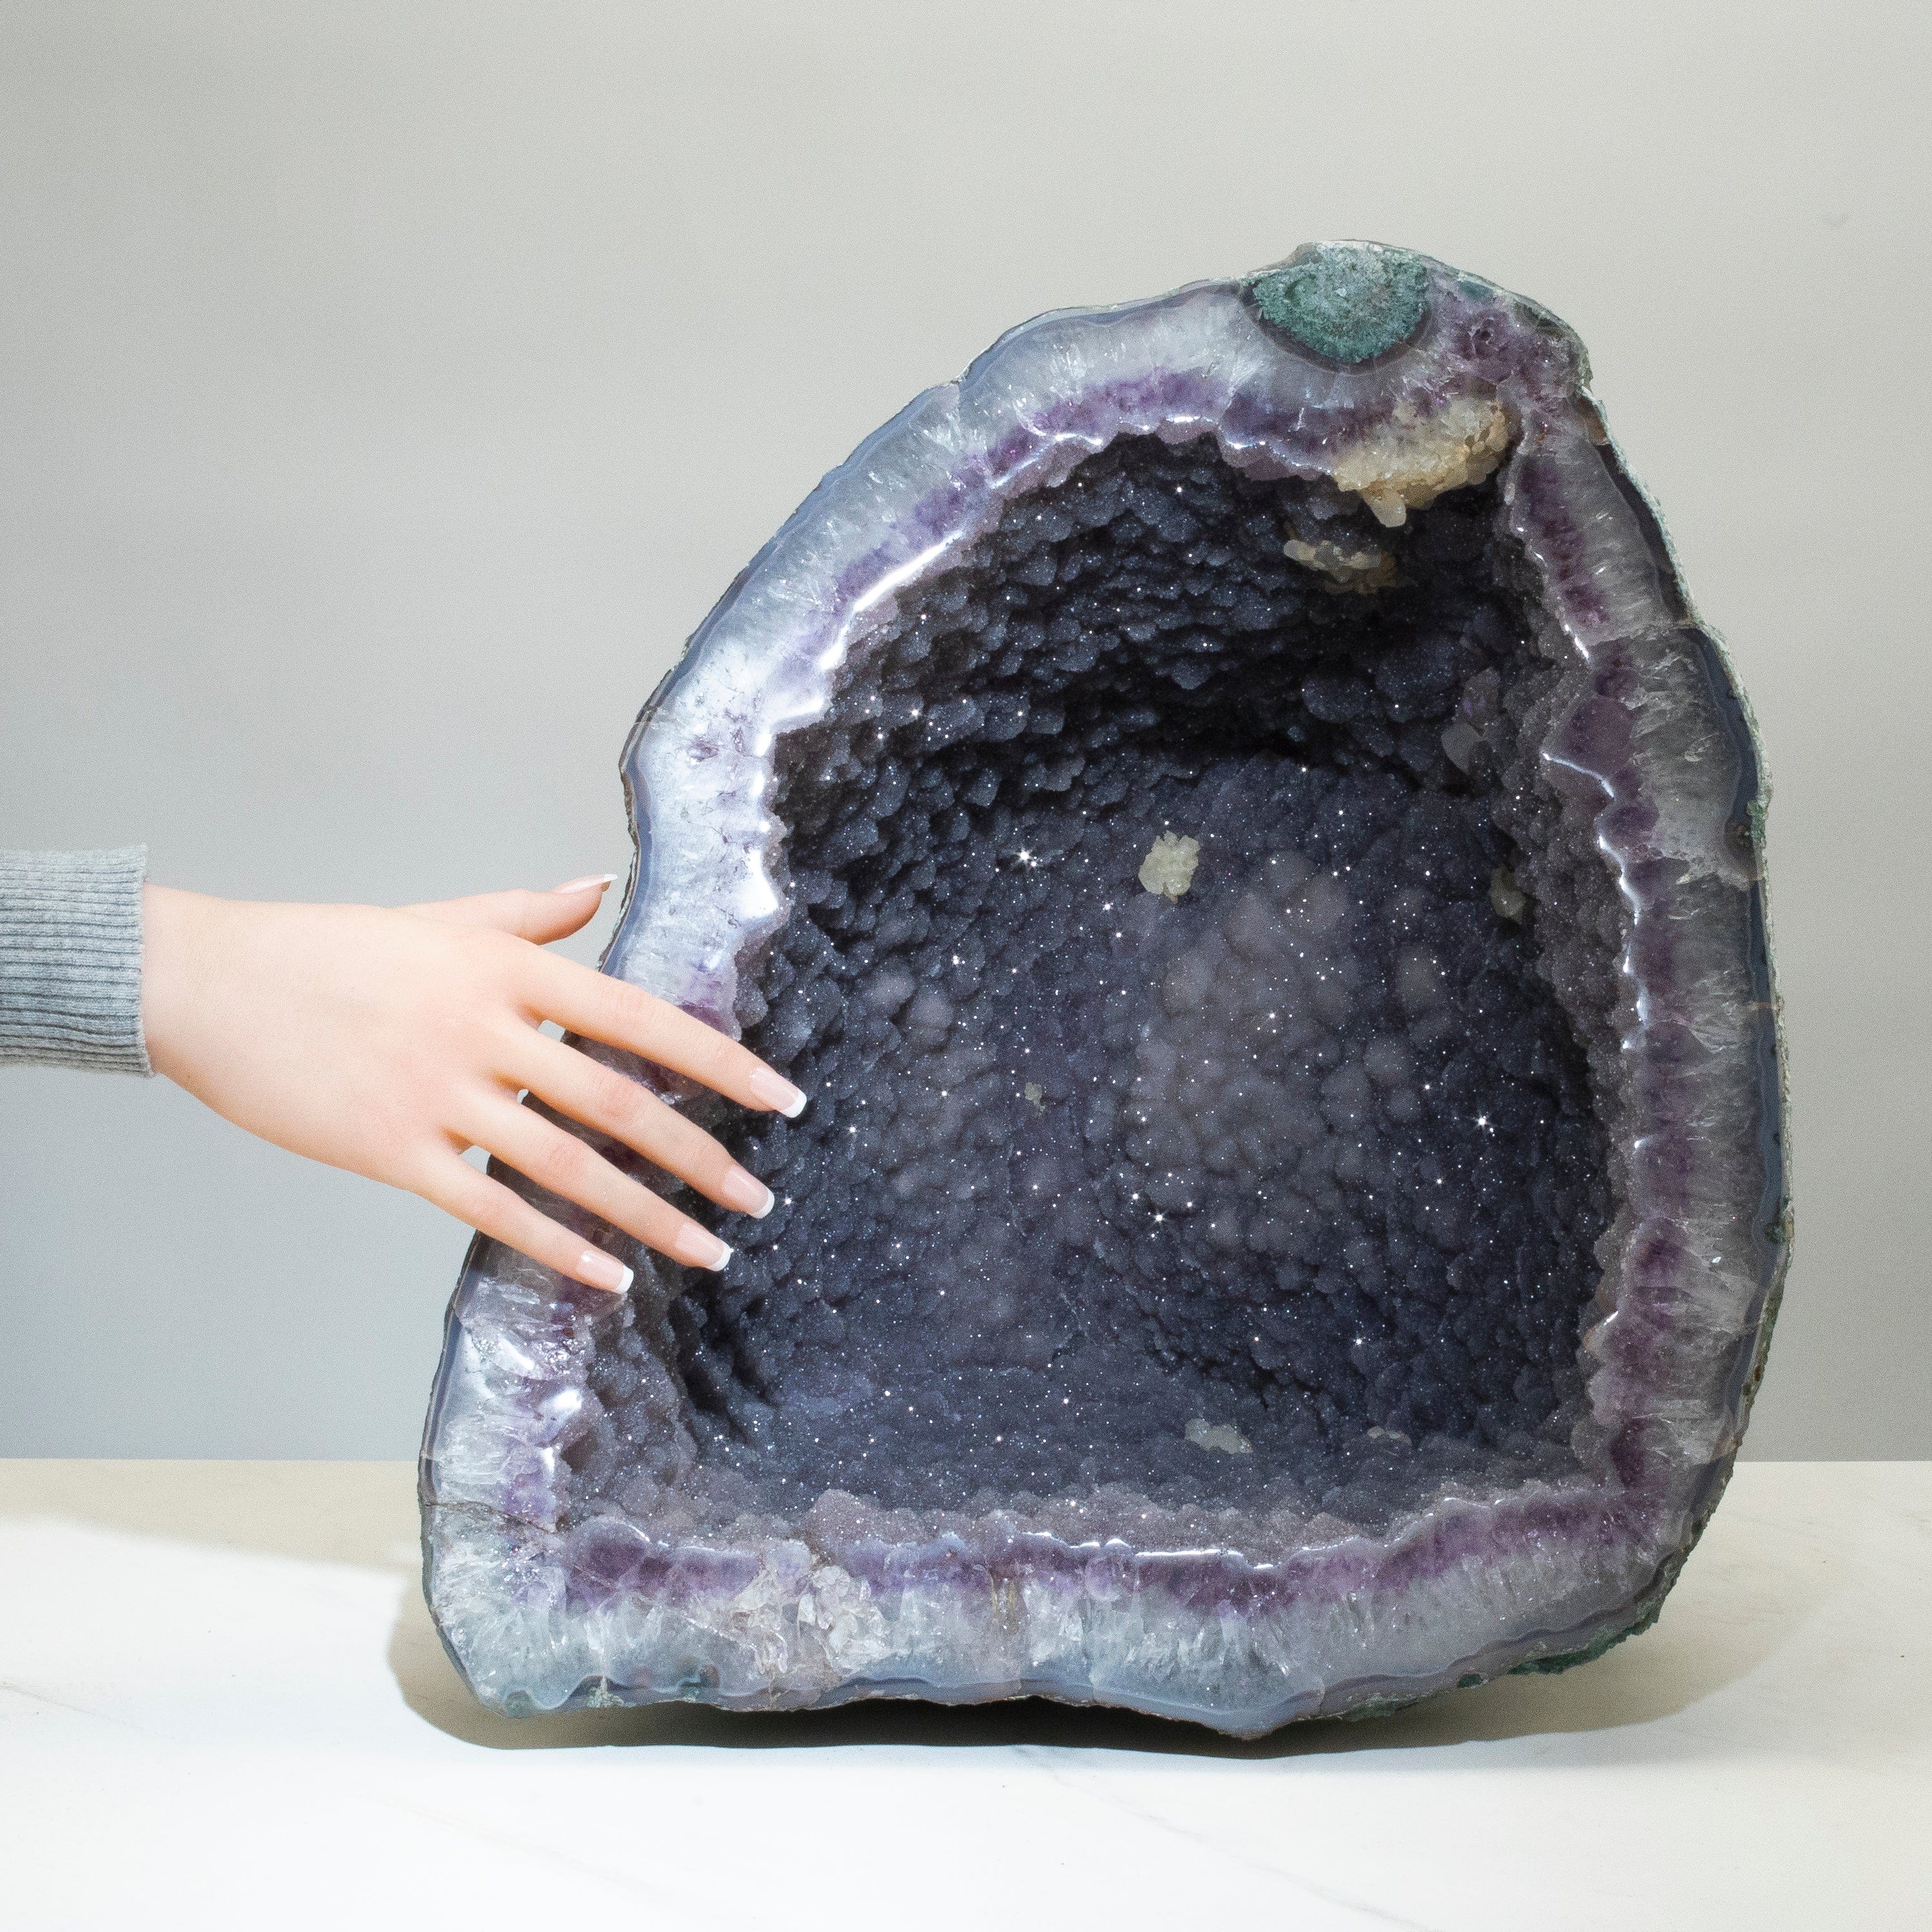 Kalifano Amethyst Amethyst Geode (with Micro Crystals) - 14" / 51lbs BAG6400.005